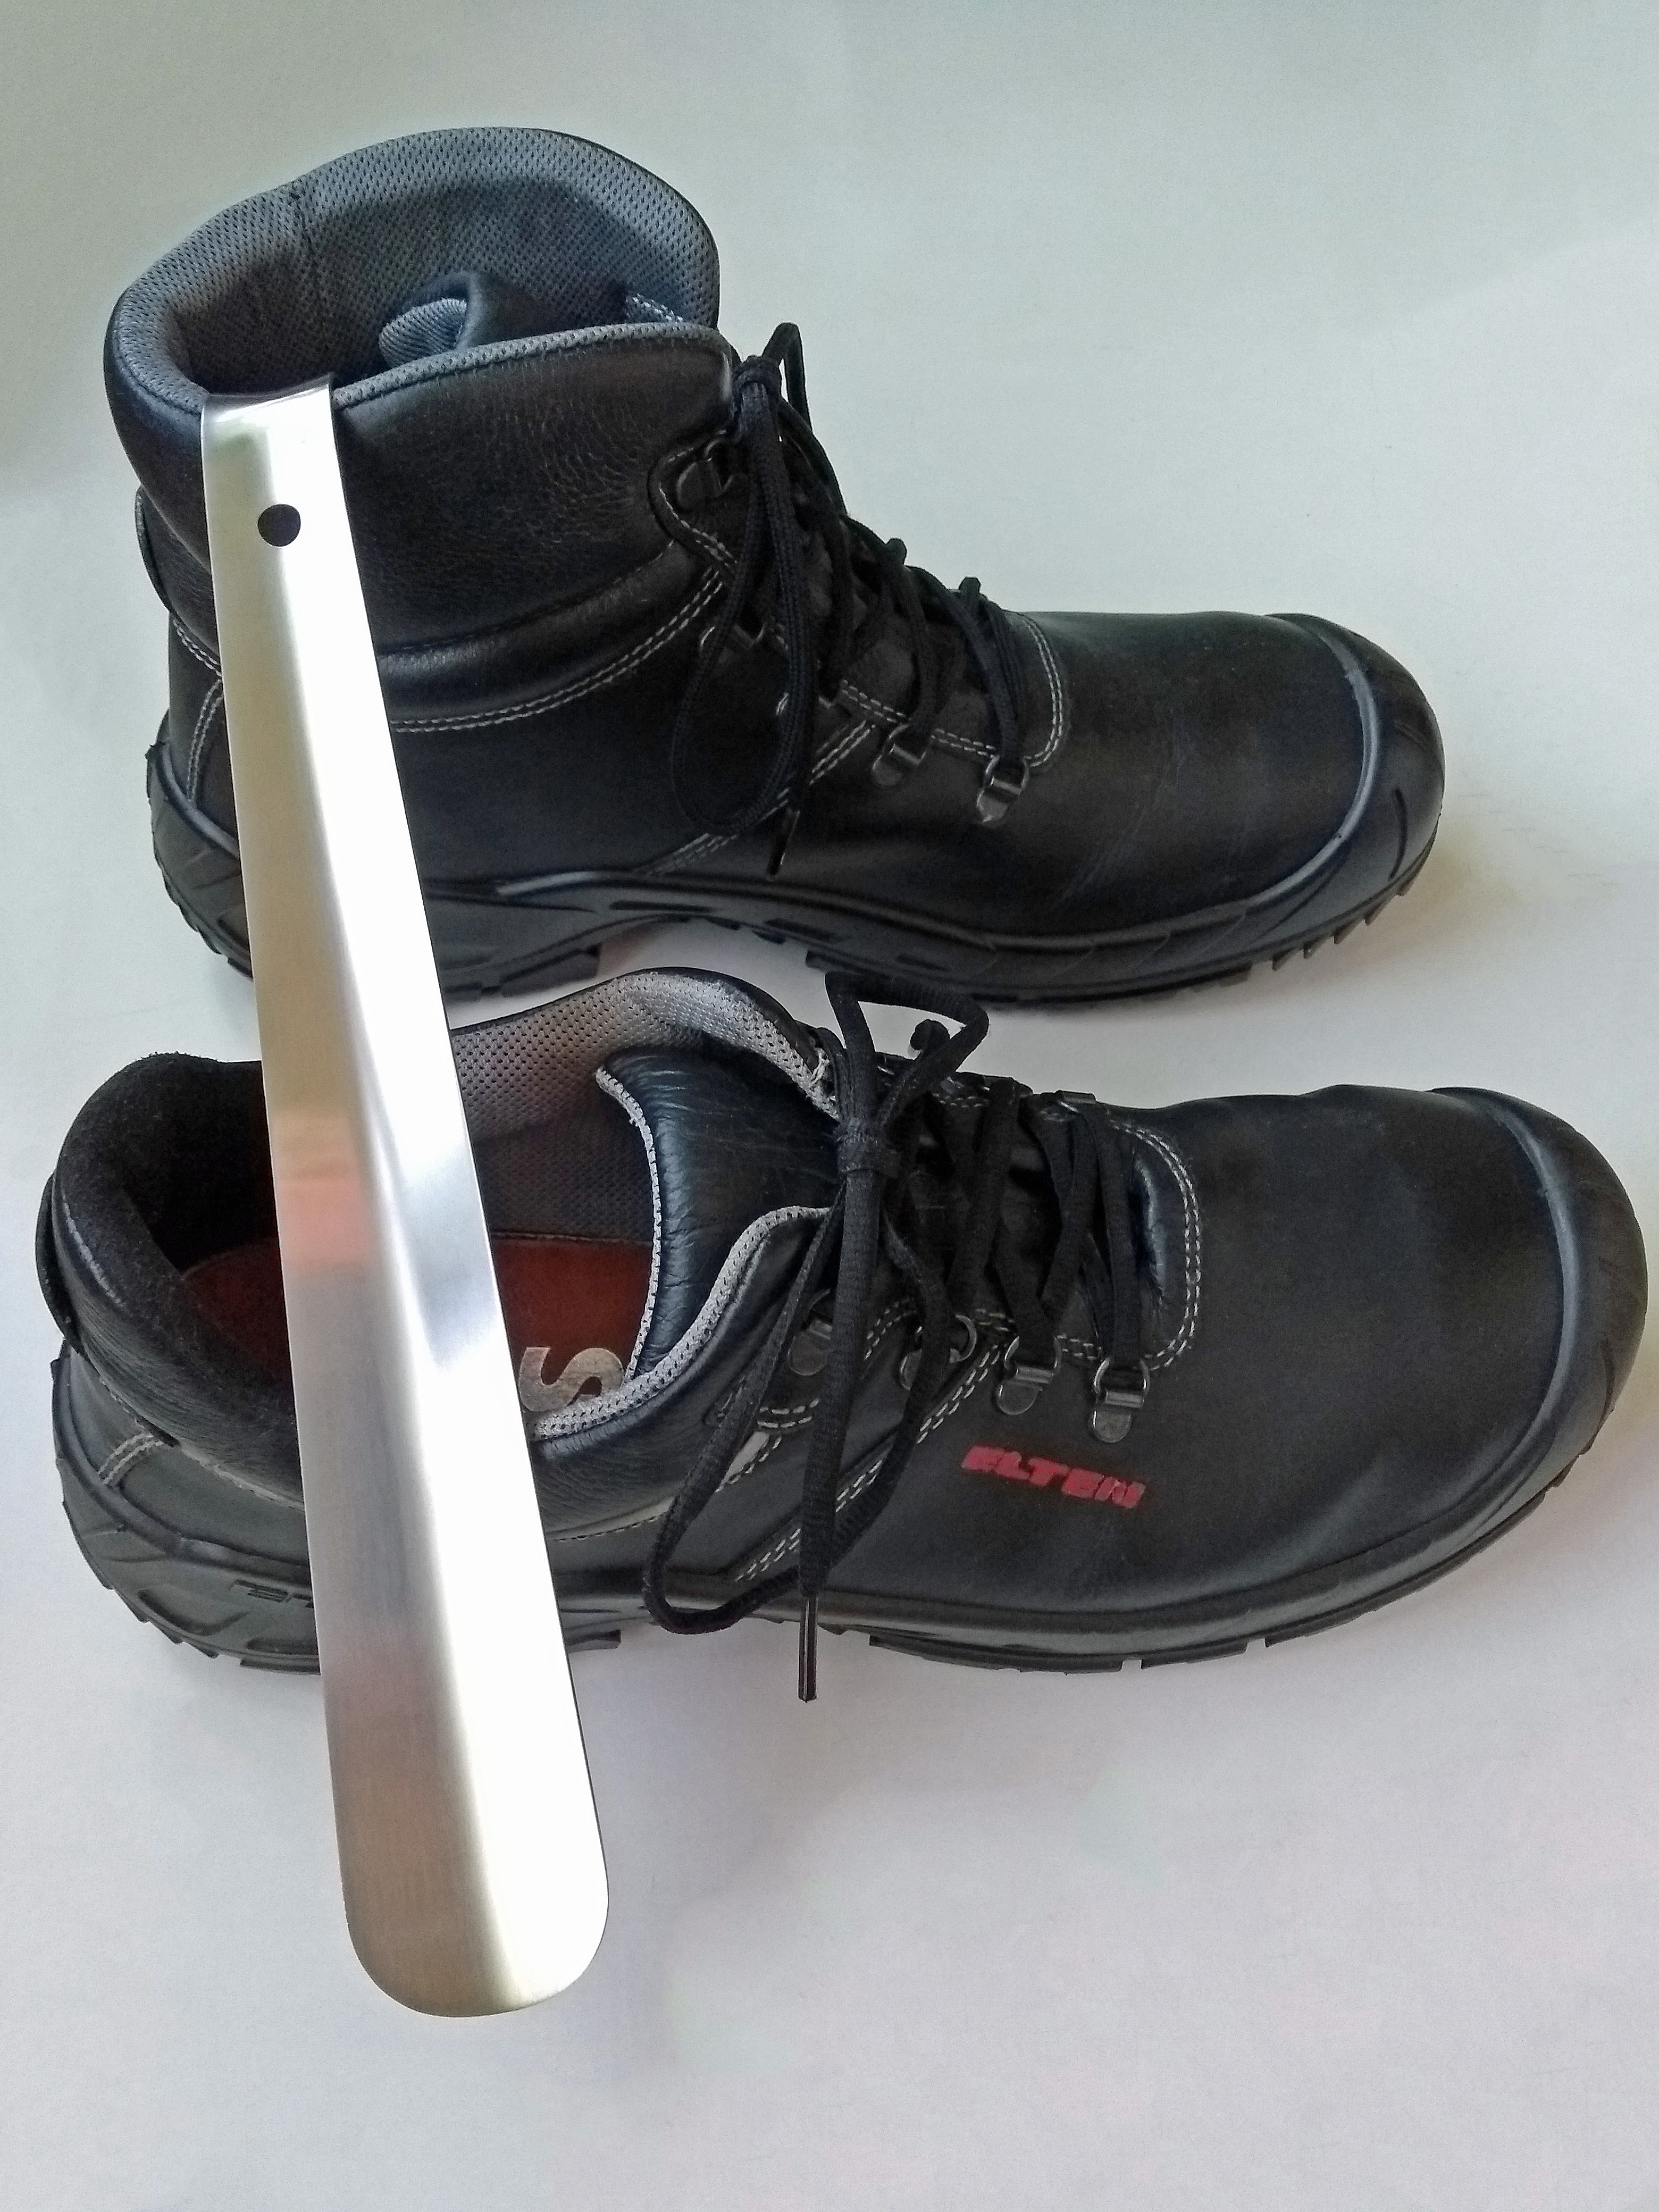 stainless steel boots